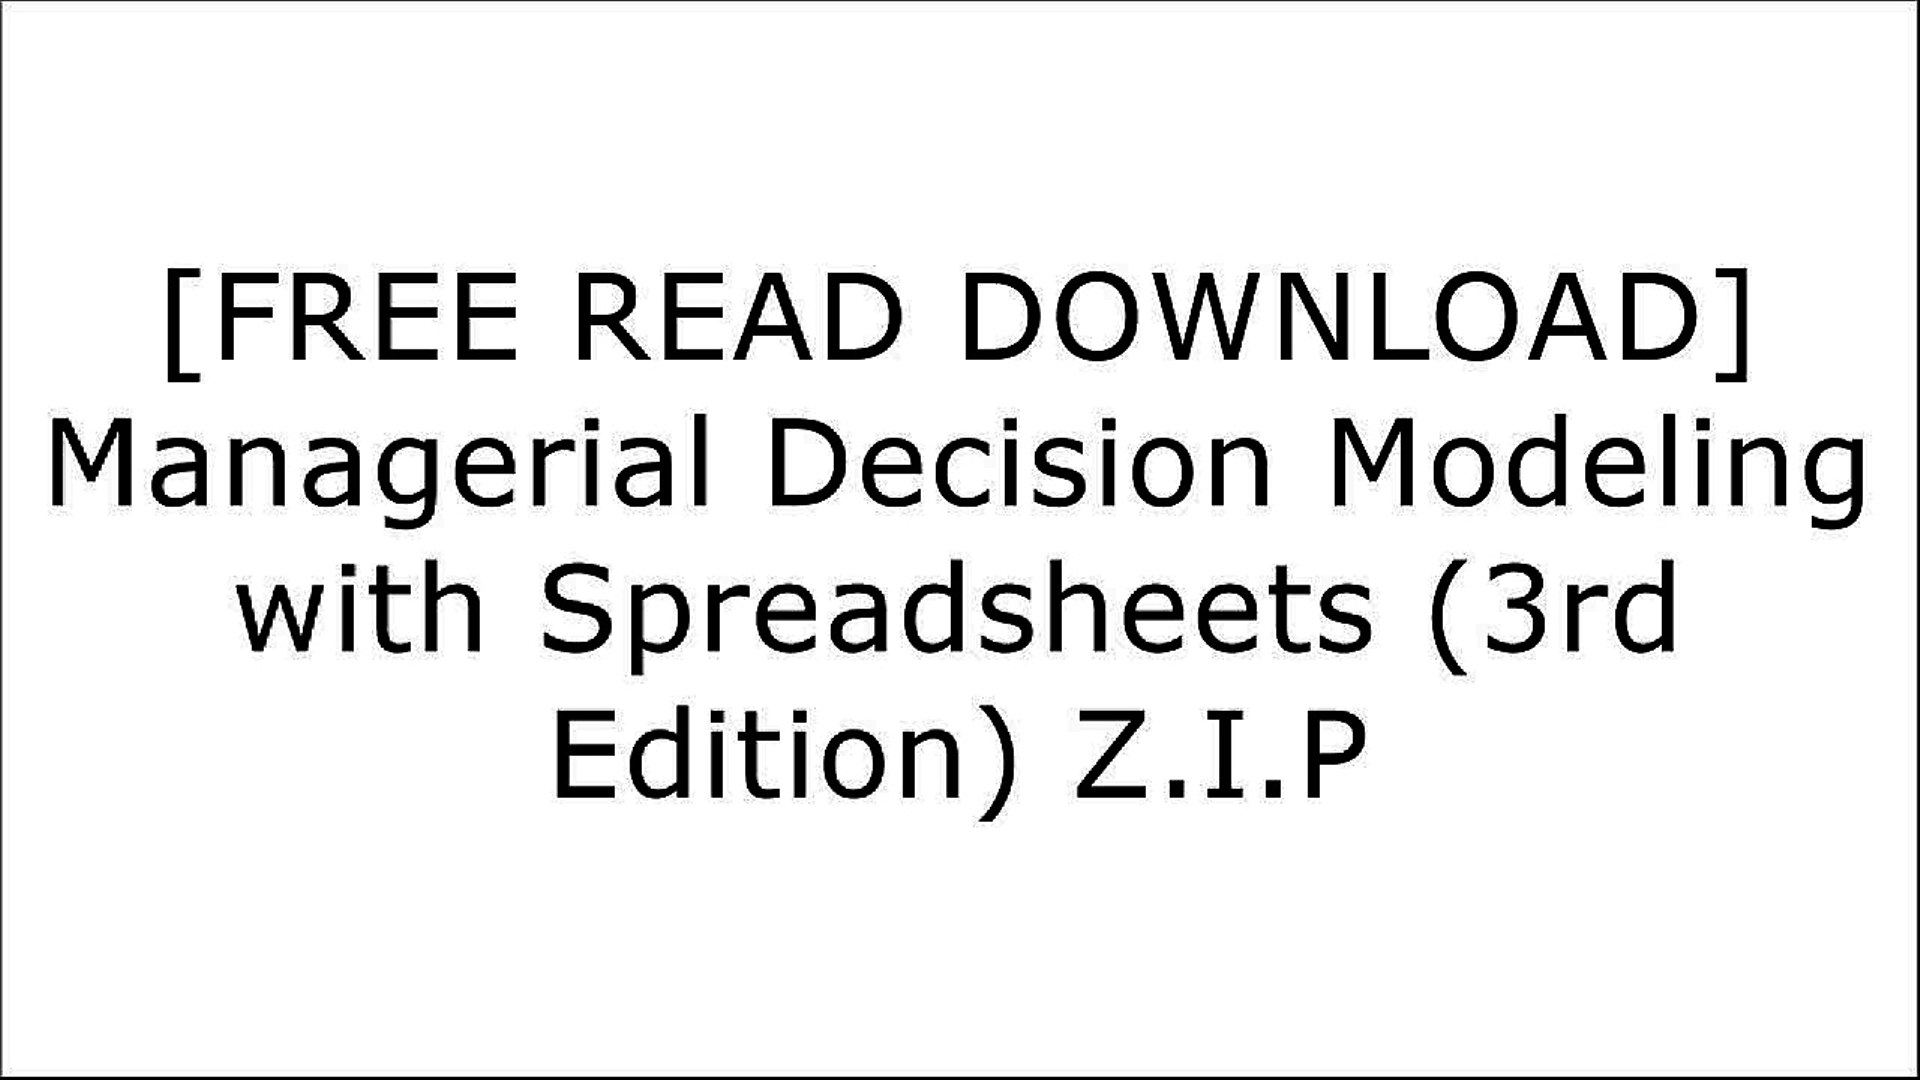 Managerial Decision Modeling With Spreadsheets 3Rd Edition with Zr4Bx.[F.r.e.e] [R.e.a.d] [D.o.w.n.l.o.a.d]] Managerial Decision